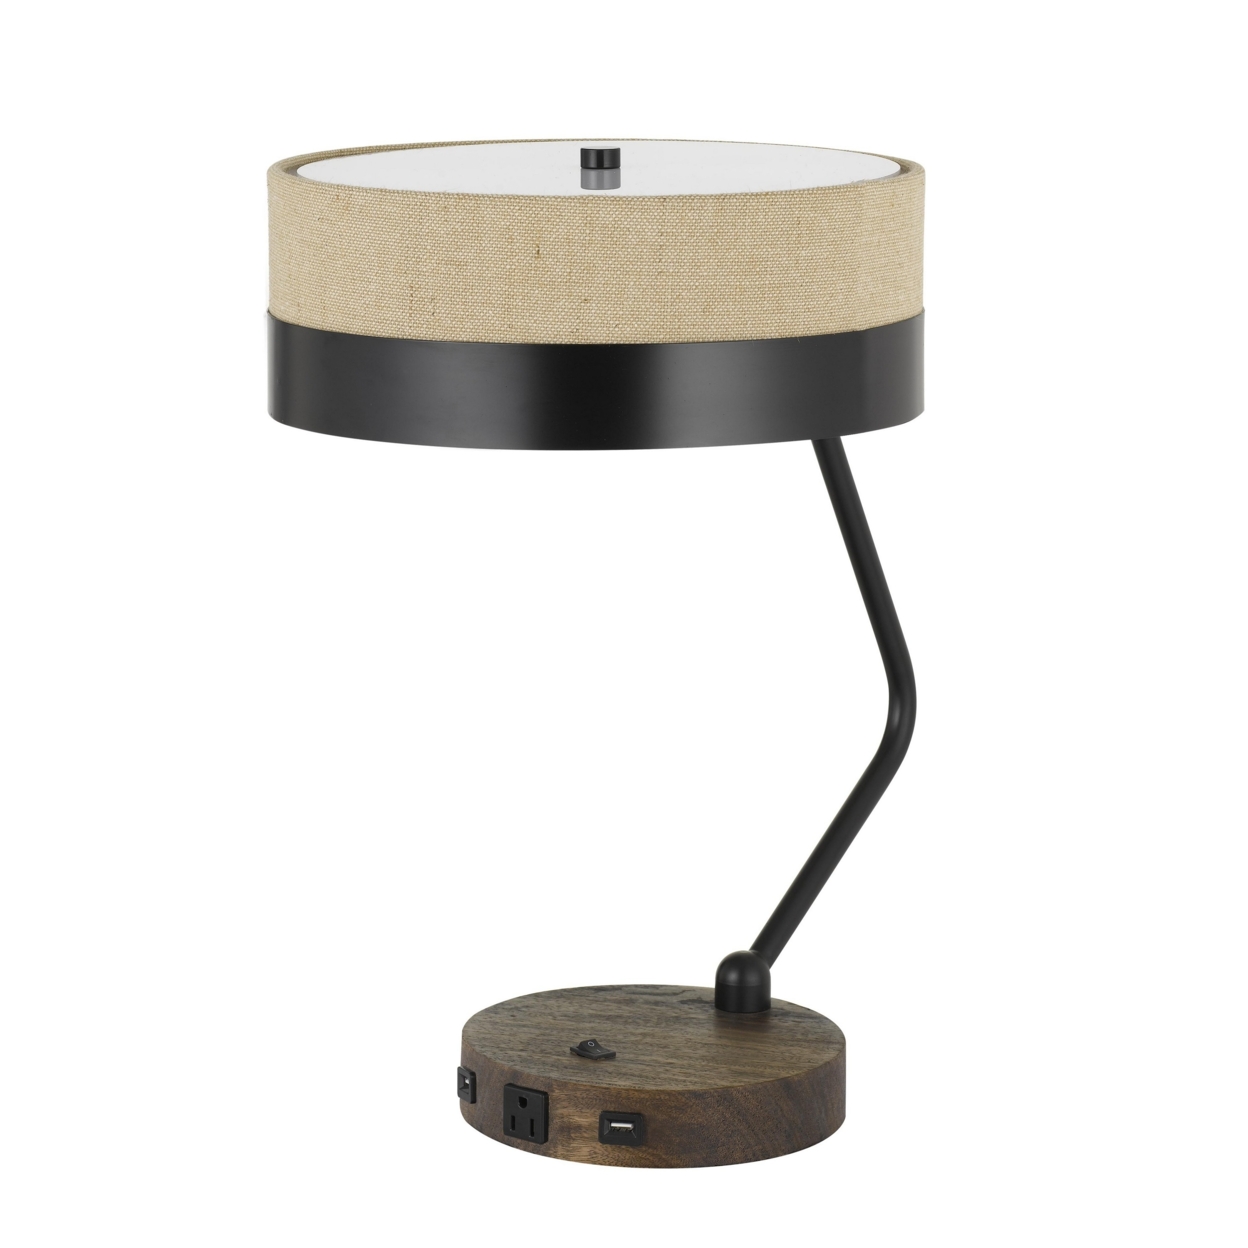 Metal Lined Fabric Shade Desk Lamp With Wooden Base, Beige And Black- Saltoro Sherpi